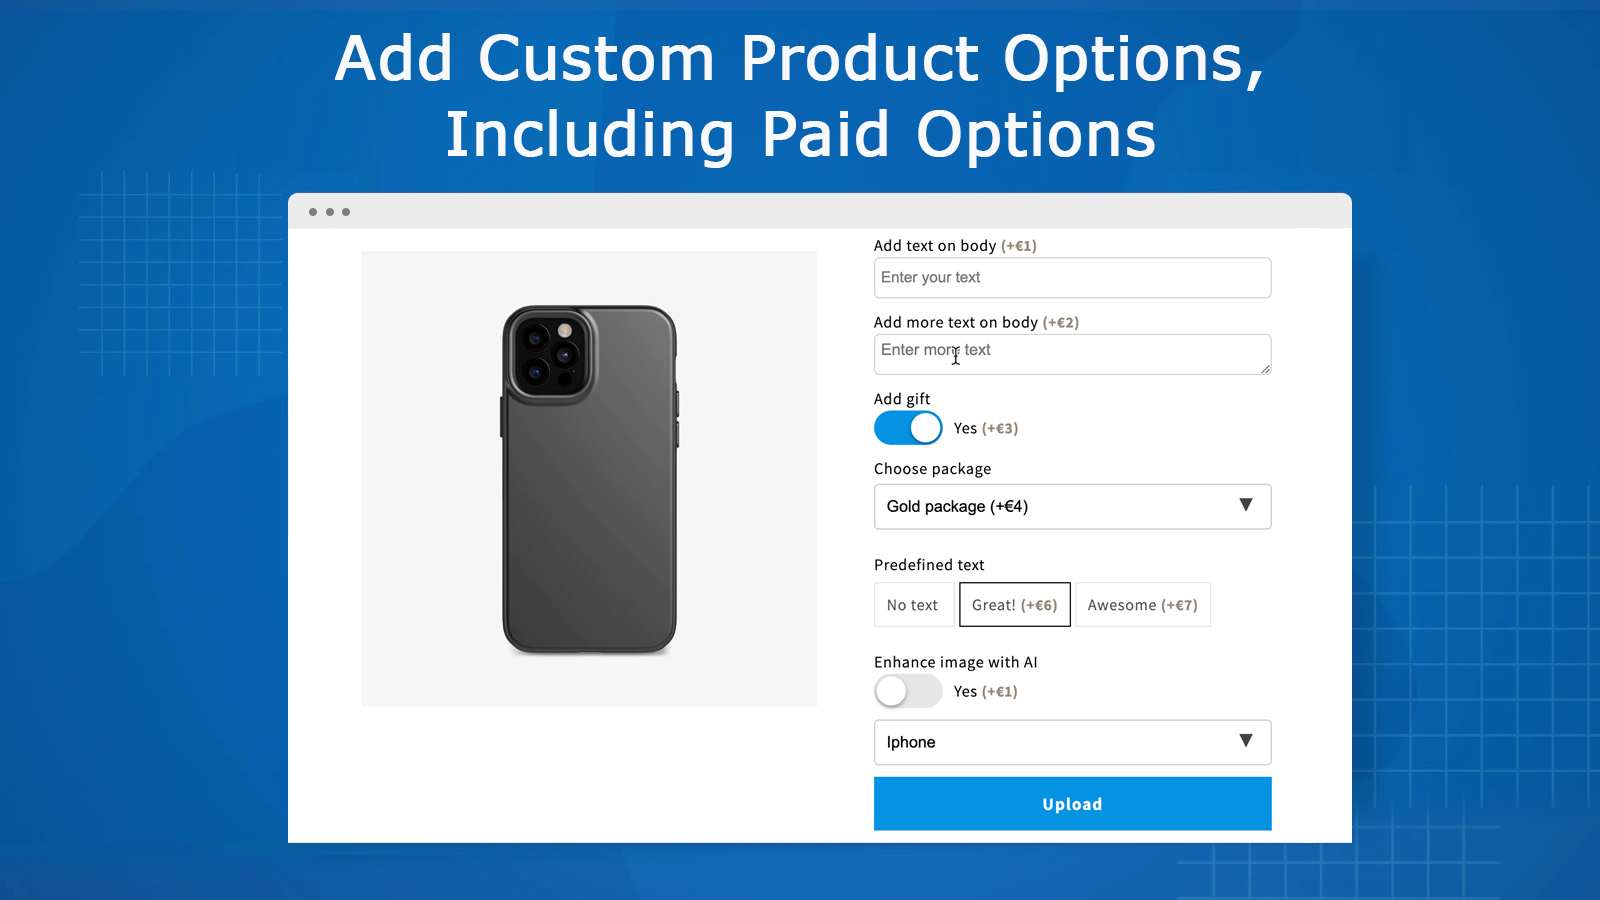 Add custom product options, incuding paid product options